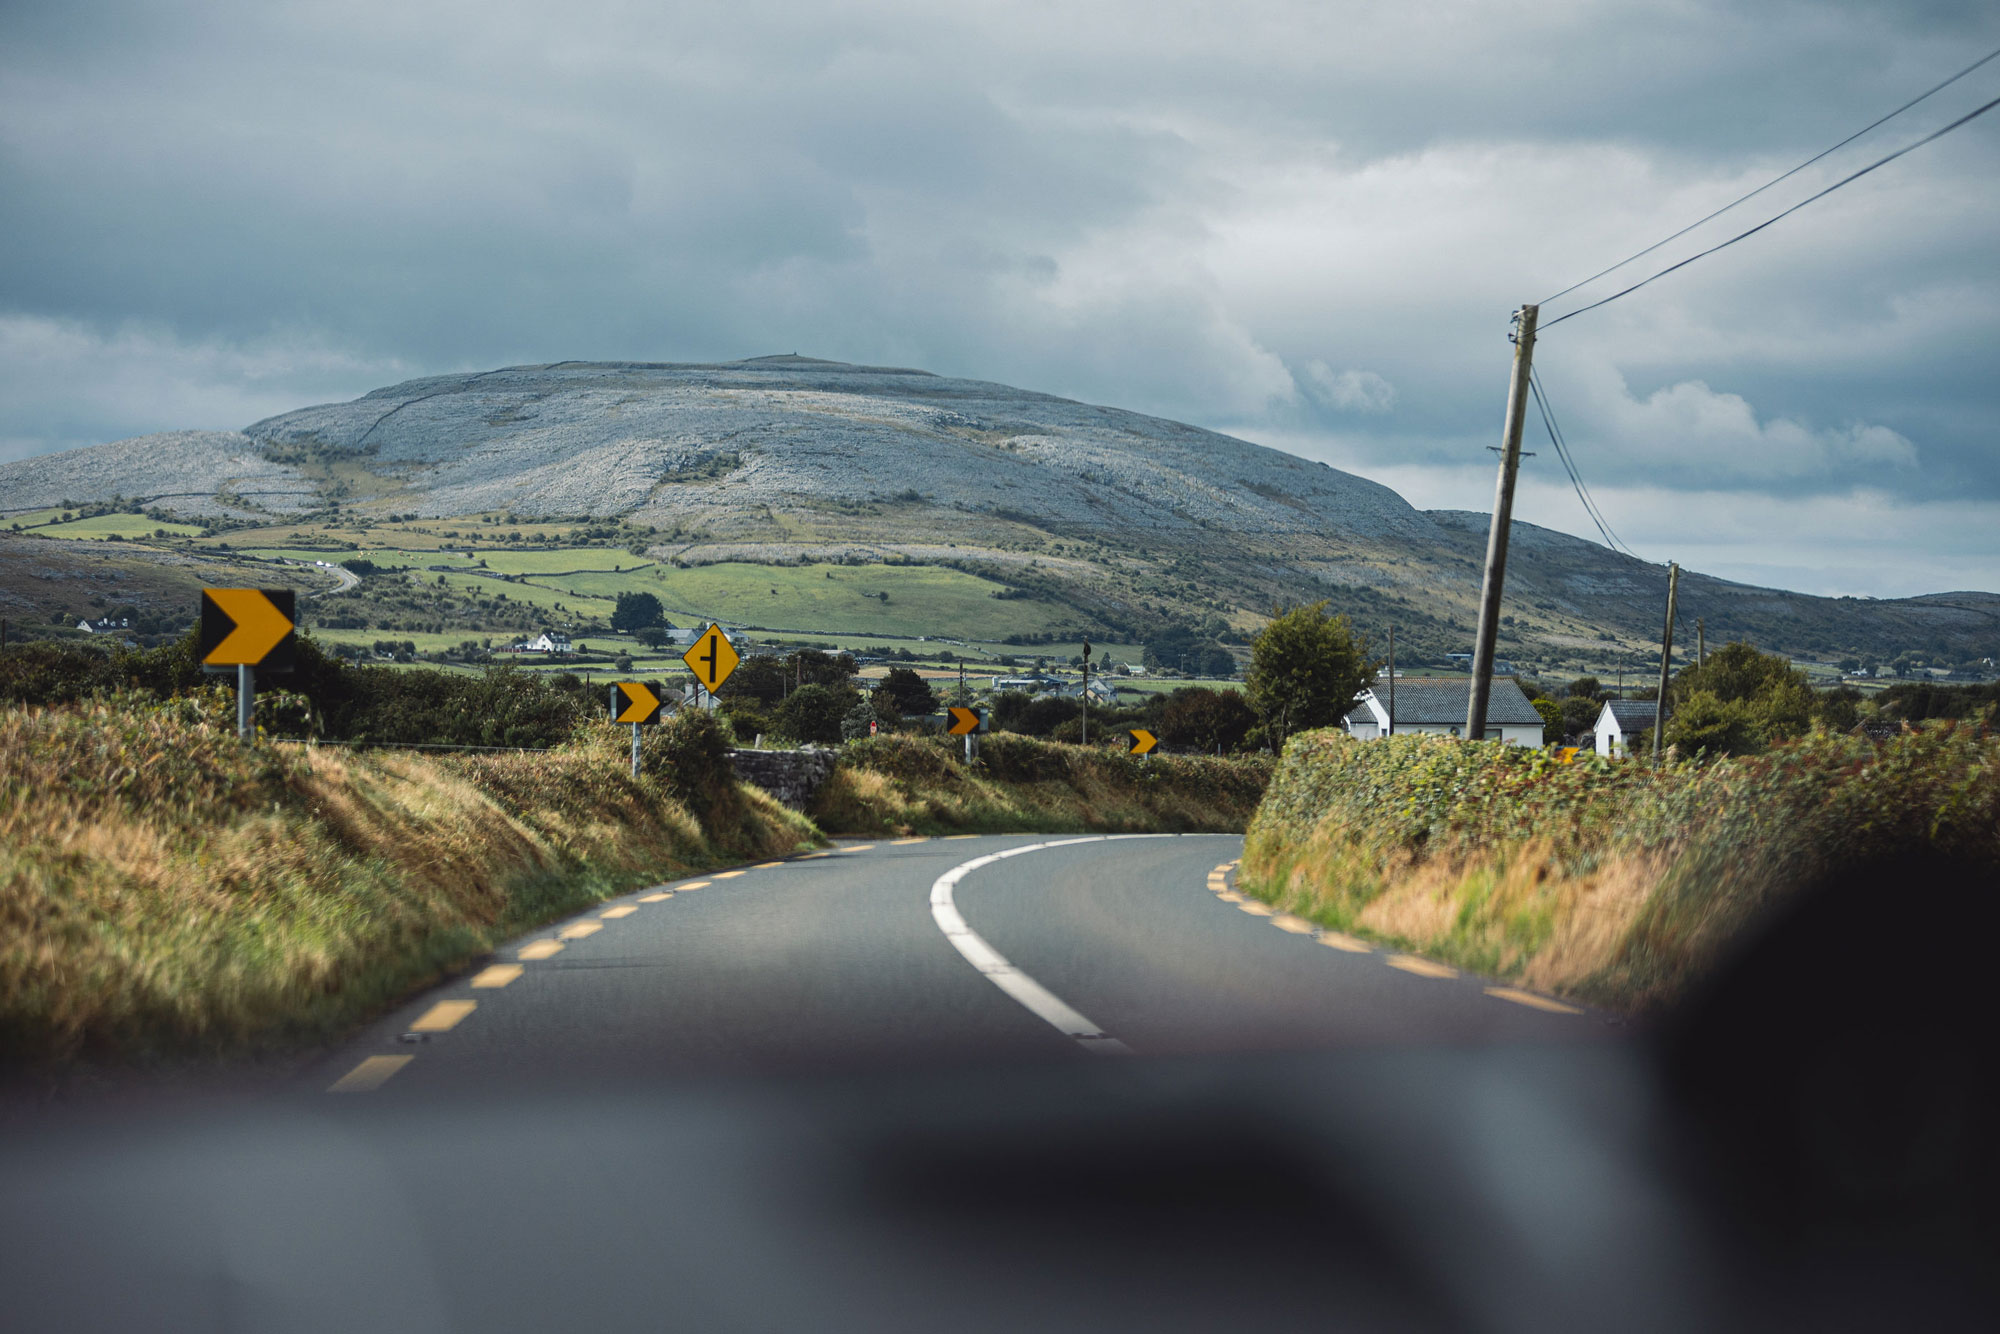 View of Irish country road from car, mountain in distance